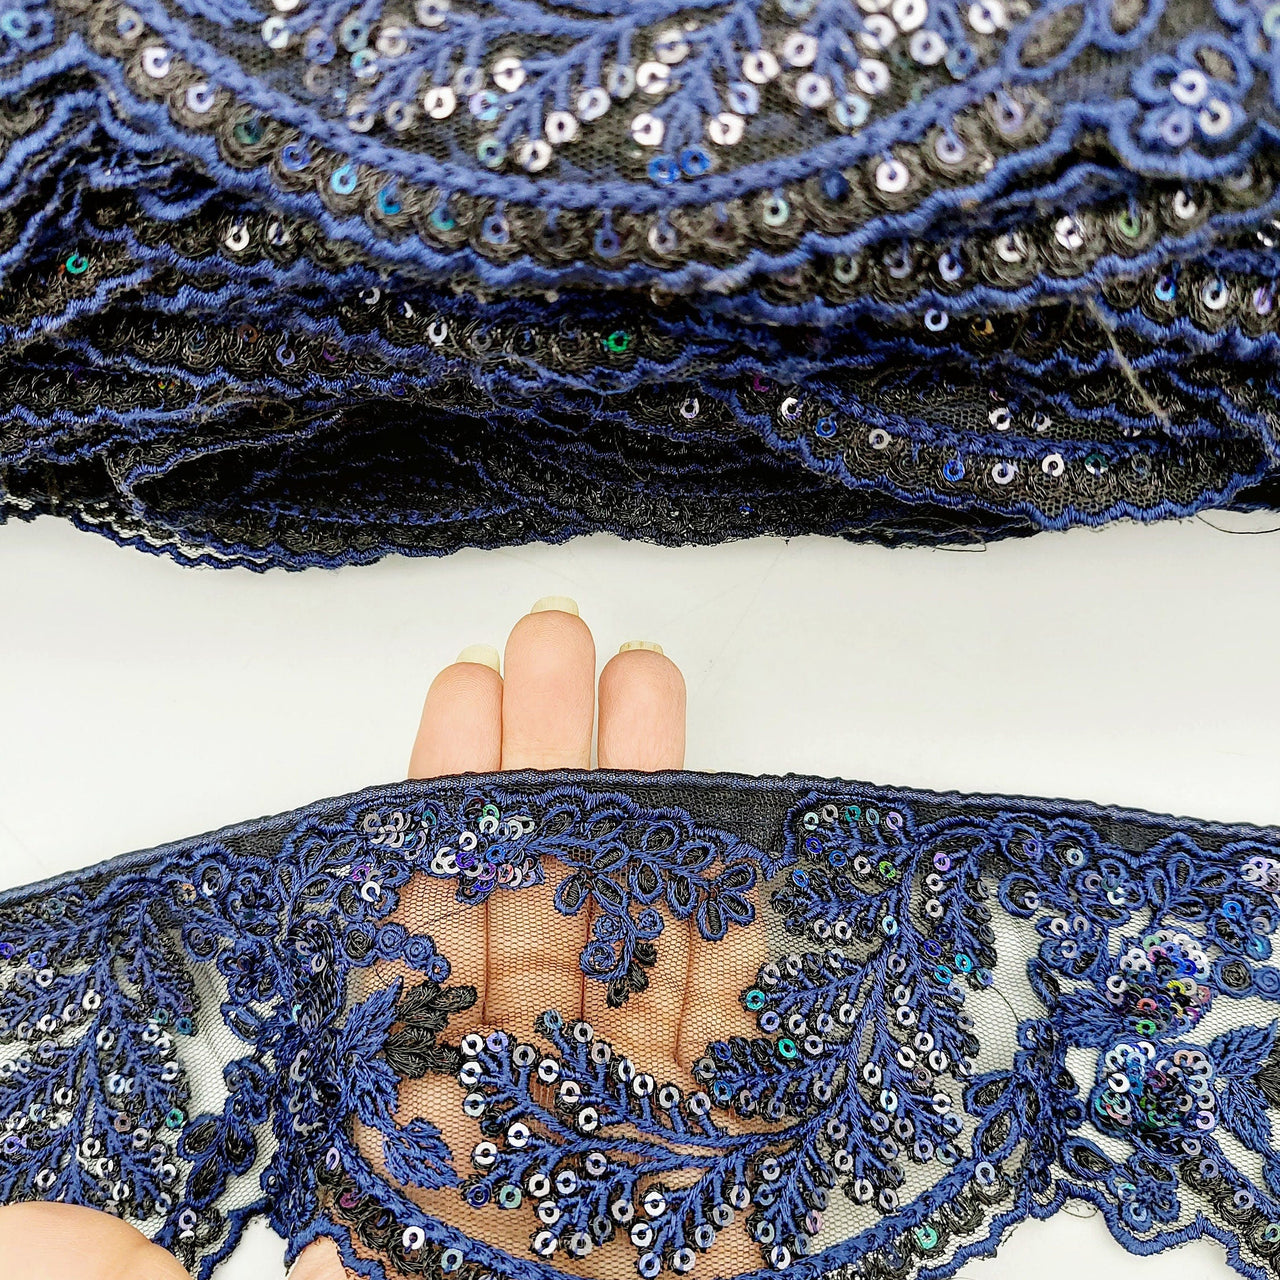 Black Net Scallop Lace Trim with Navy Blue Floral Embroidery With Sequins, Sari Border, Embroidered Trim